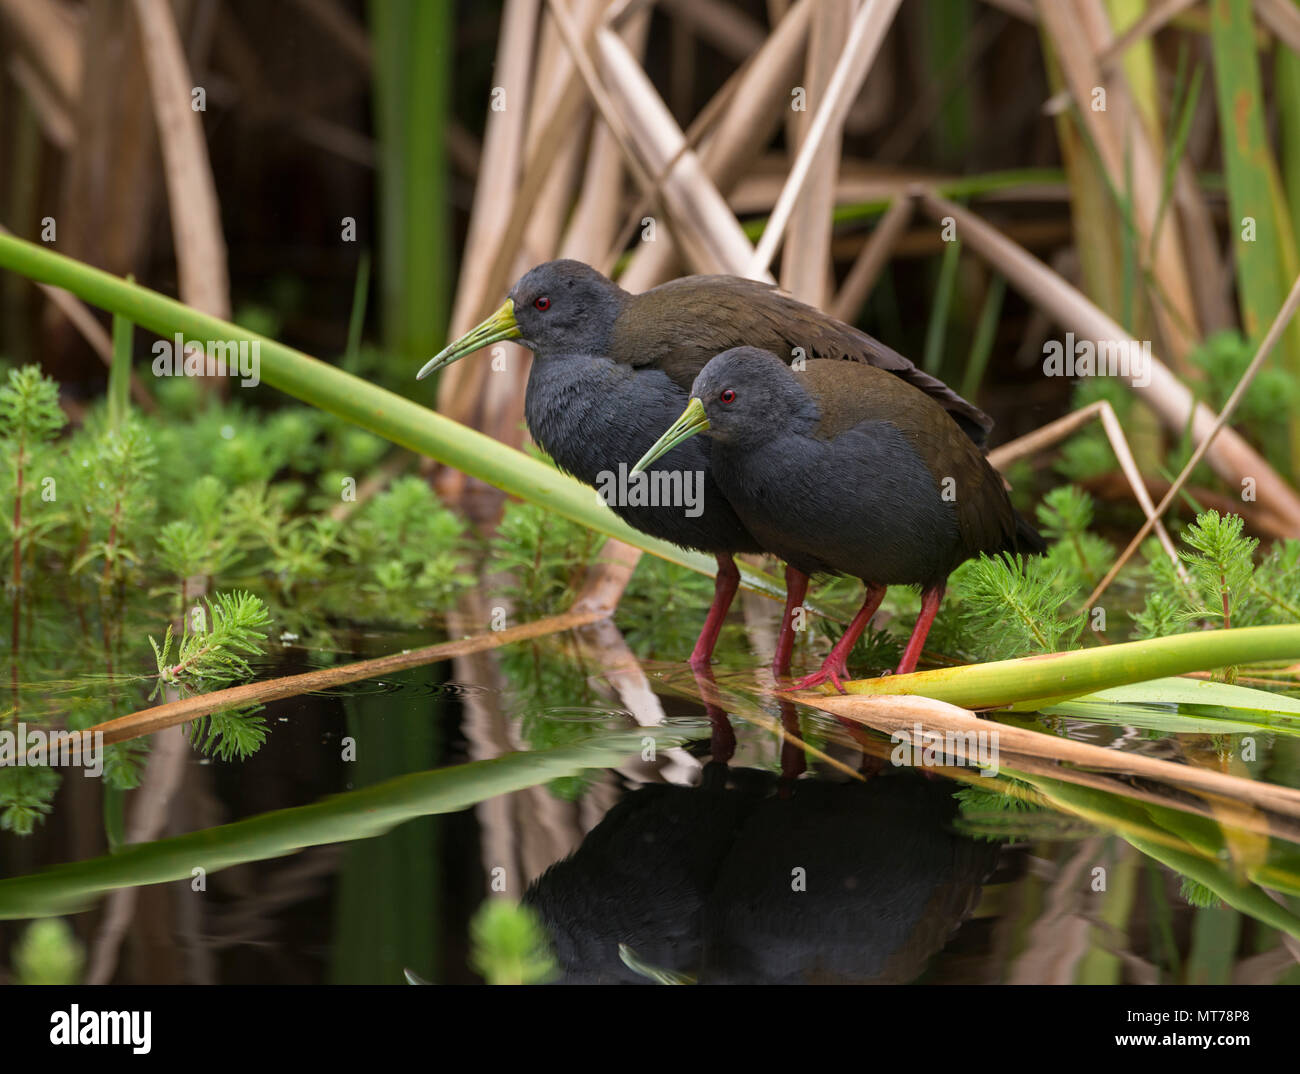 A pair of Blackish Rails (Pardirallus nigricans) from SE Brazil Stock Photo